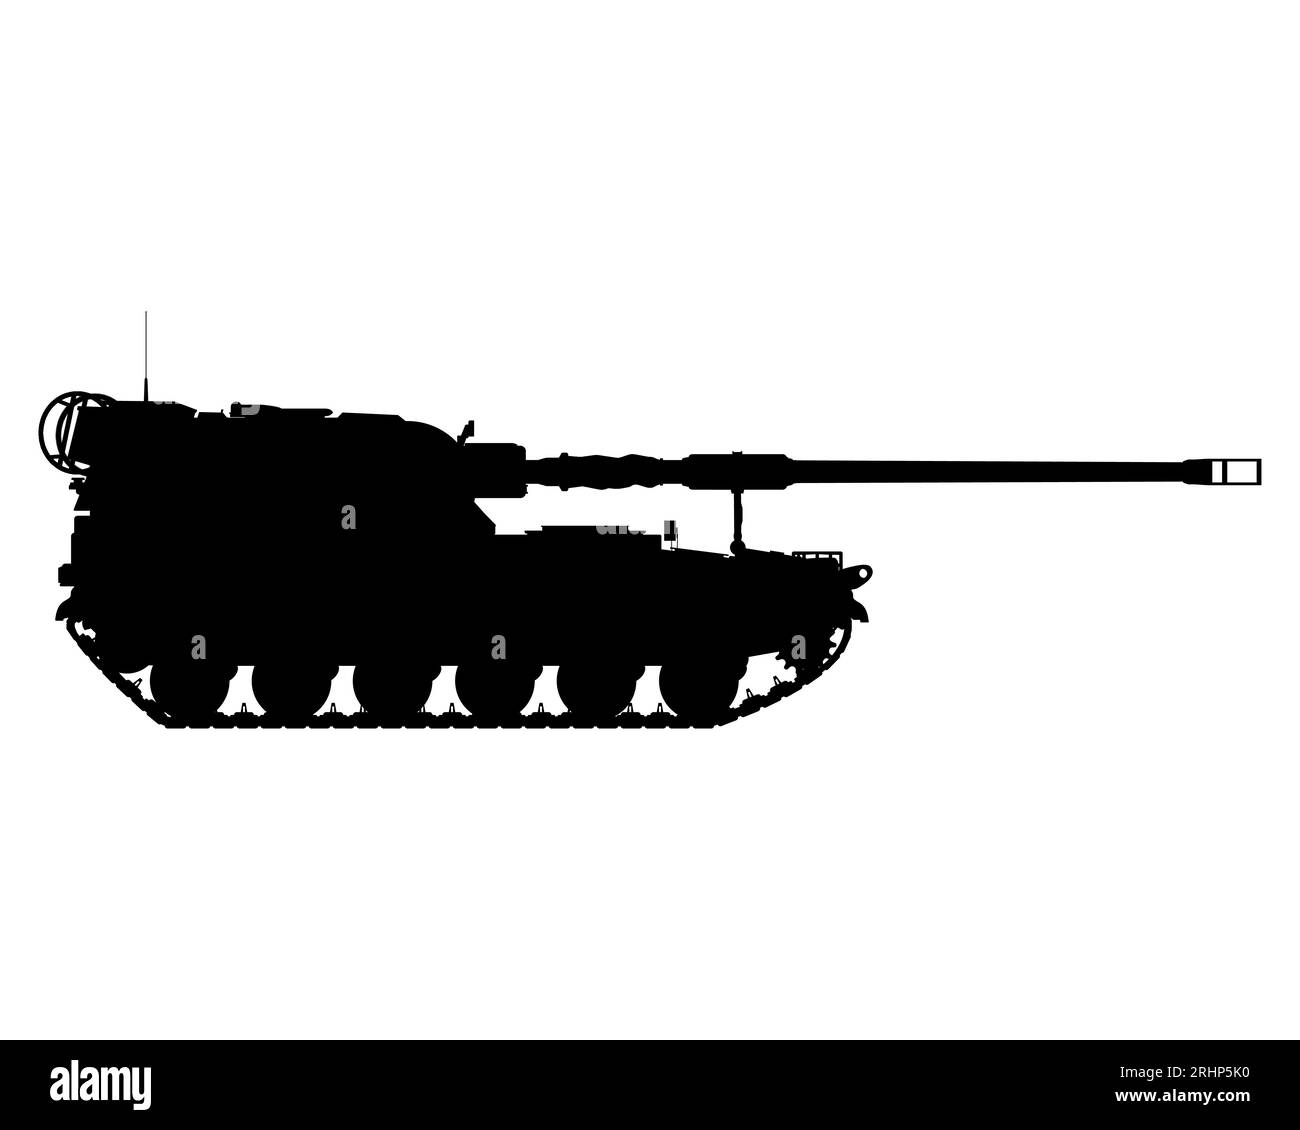 AHS Krab silhouette. Polish self-propelled artillery. Polish weapons. Poland army. Military armored vehicle. Detailed vector illustration isolated on white background. Stock Vector